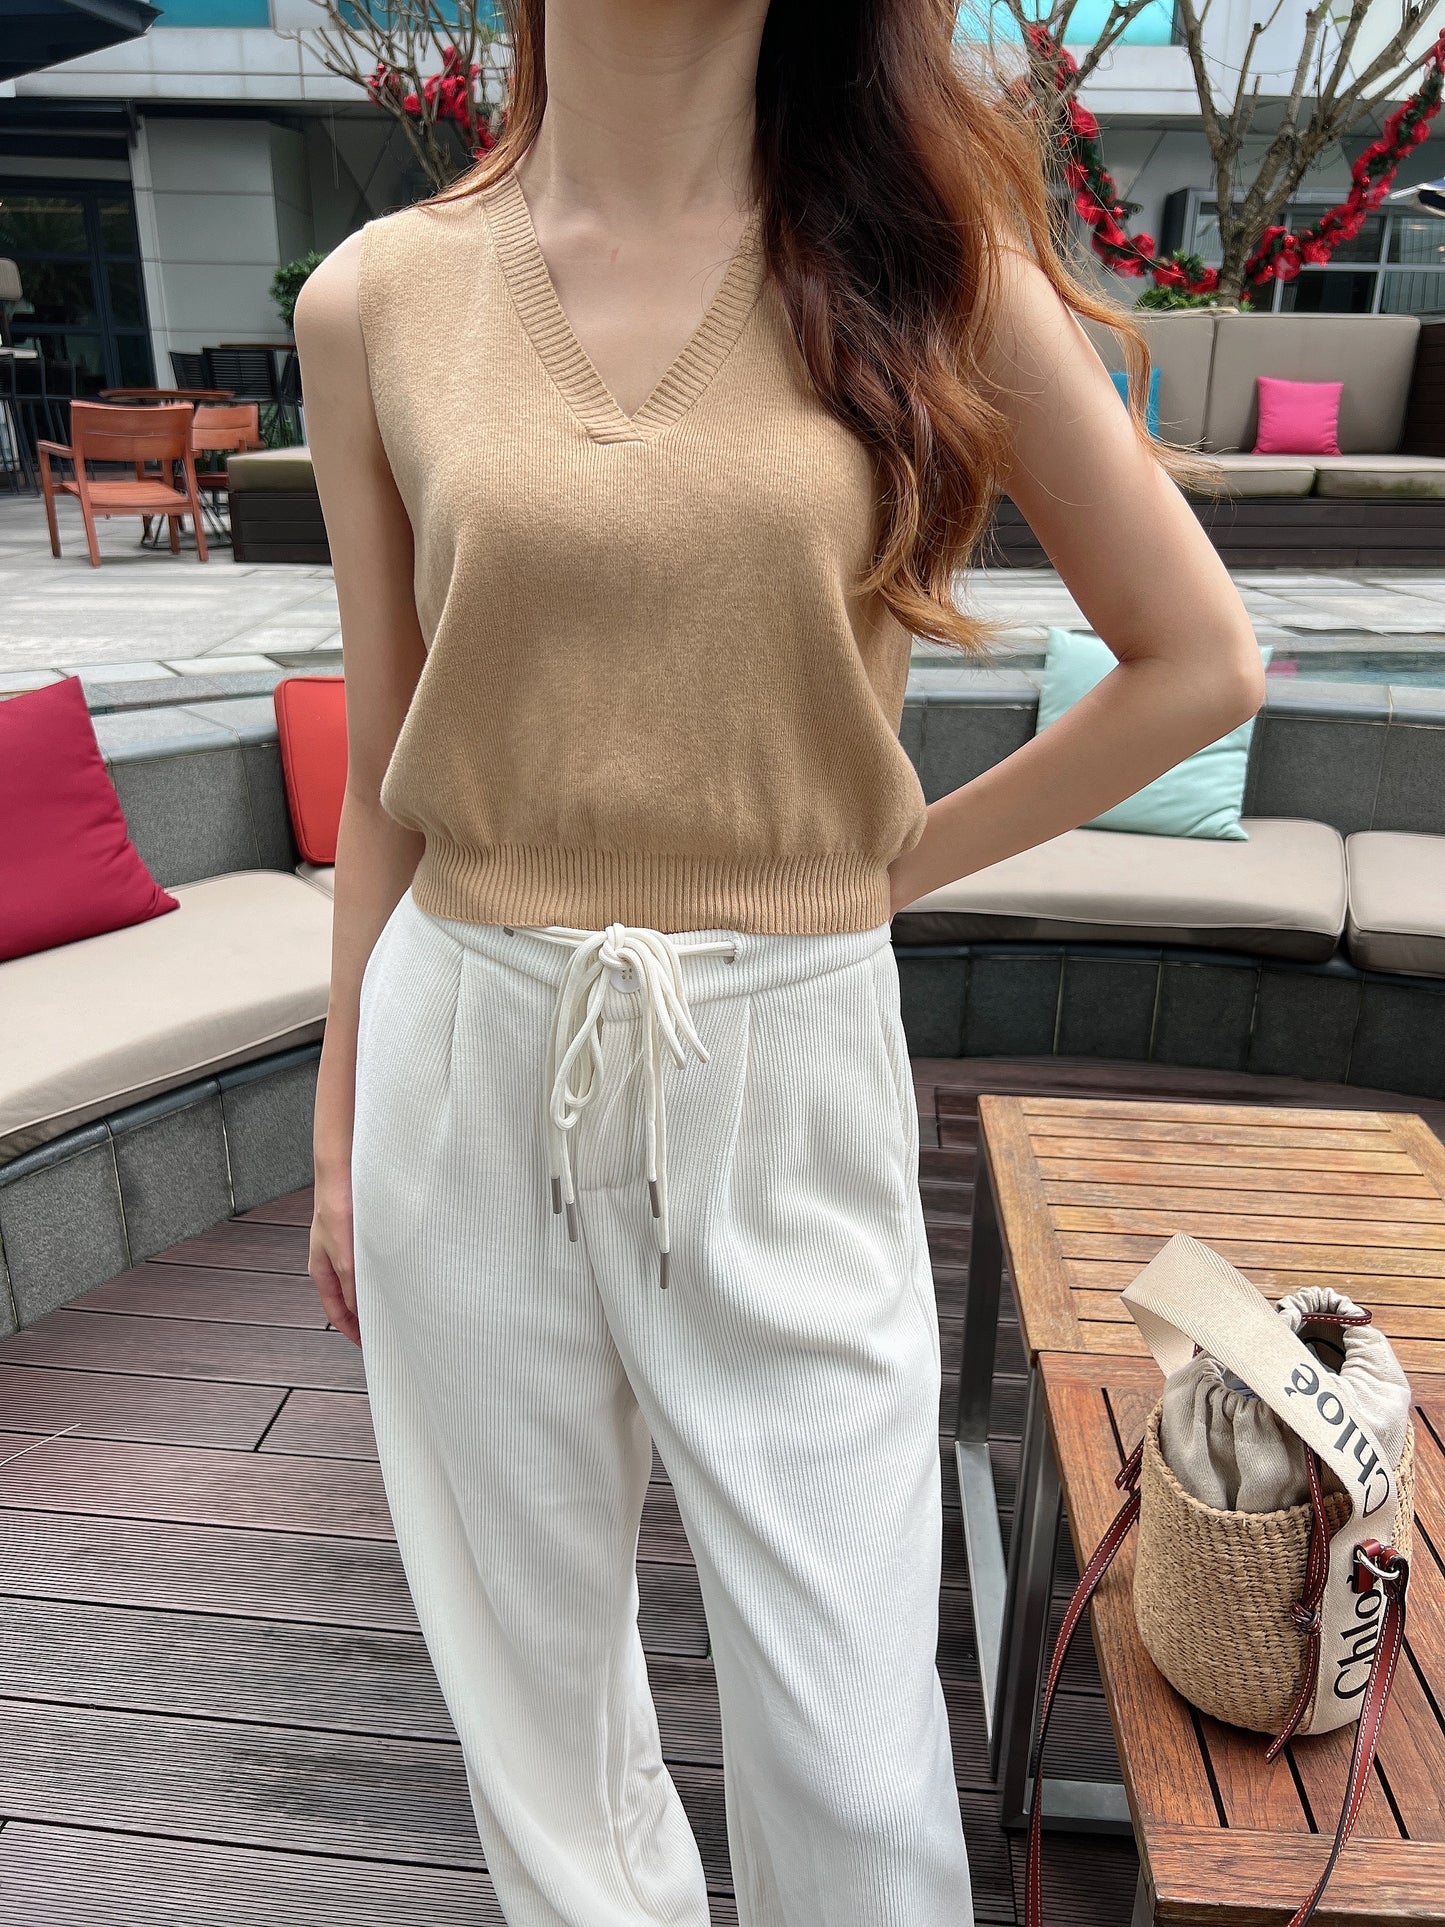 Mable Knit Vest in camel